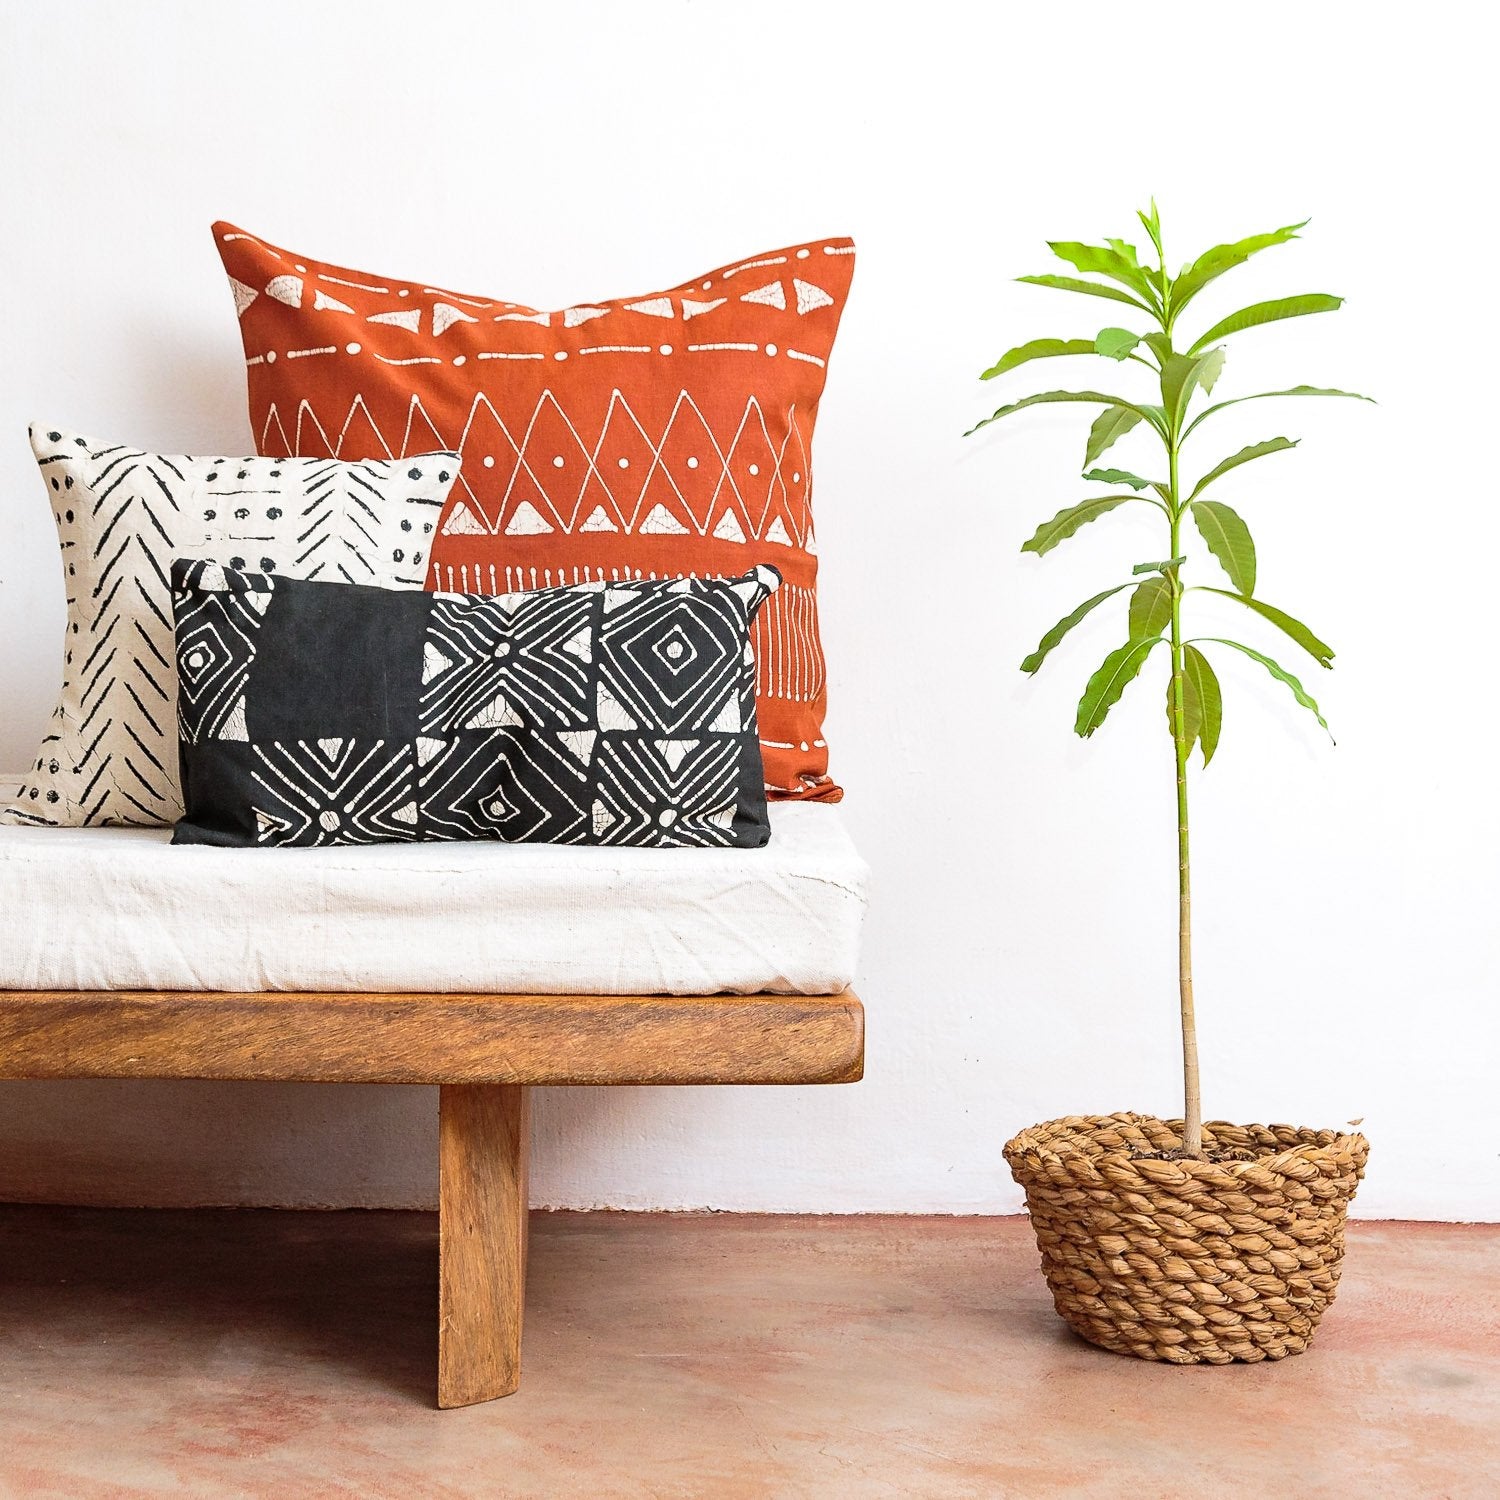 Matika Rust Linear Cushion Cover - Hand Painted by TRIBAL TEXTILES - Handcrafted Home Decor Interiors - African Made